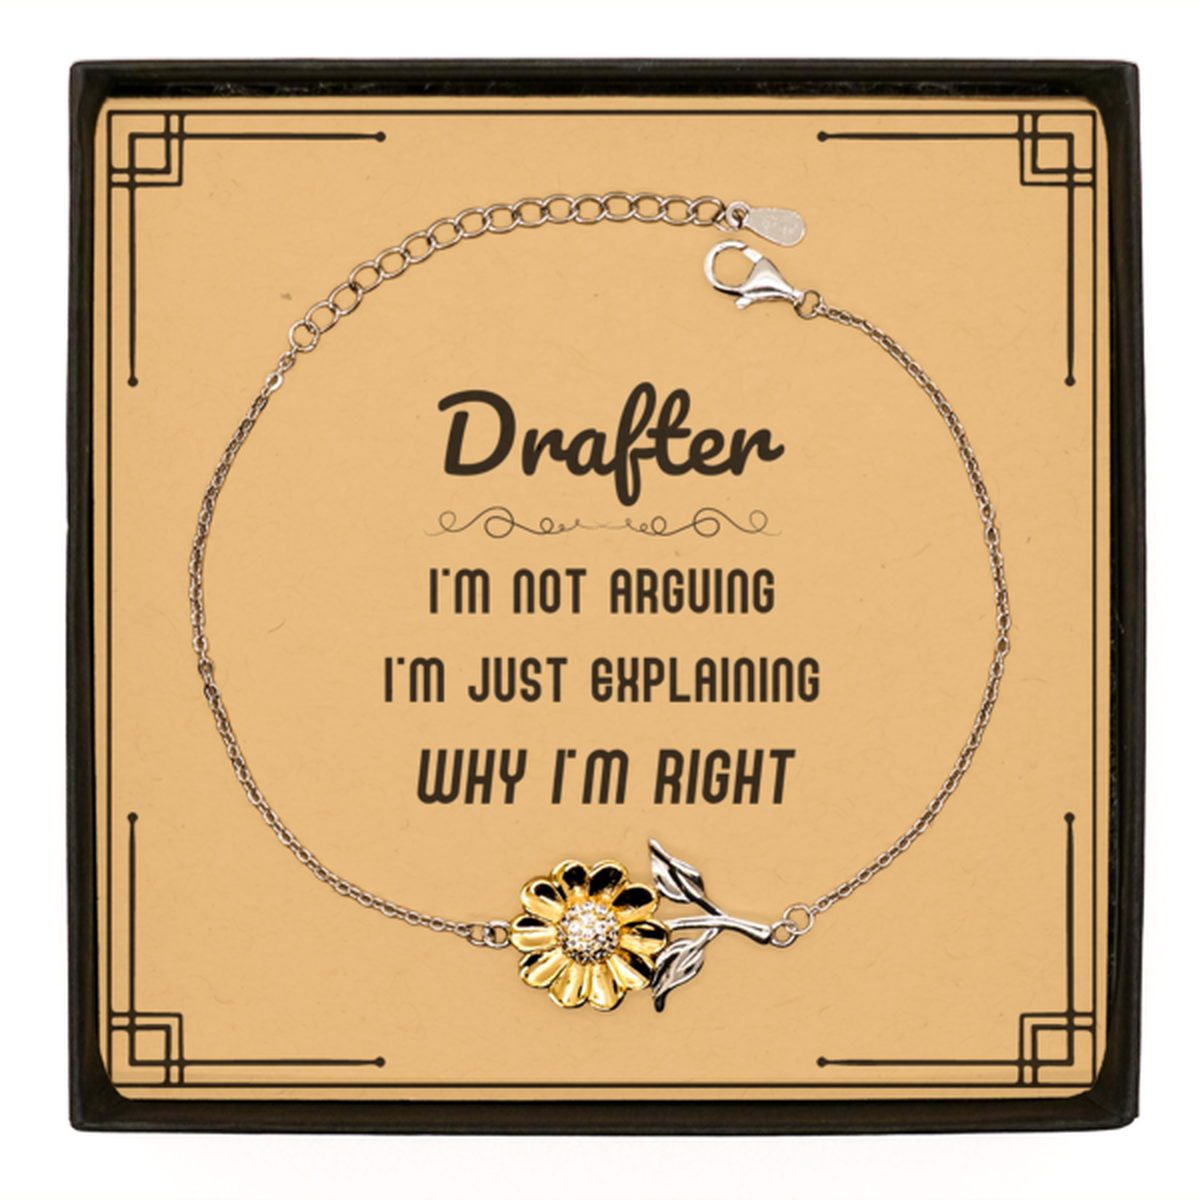 Drafter I'm not Arguing. I'm Just Explaining Why I'm RIGHT Sunflower Bracelet, Funny Saying Quote Drafter Gifts For Drafter Message Card Graduation Birthday Christmas Gifts for Men Women Coworker